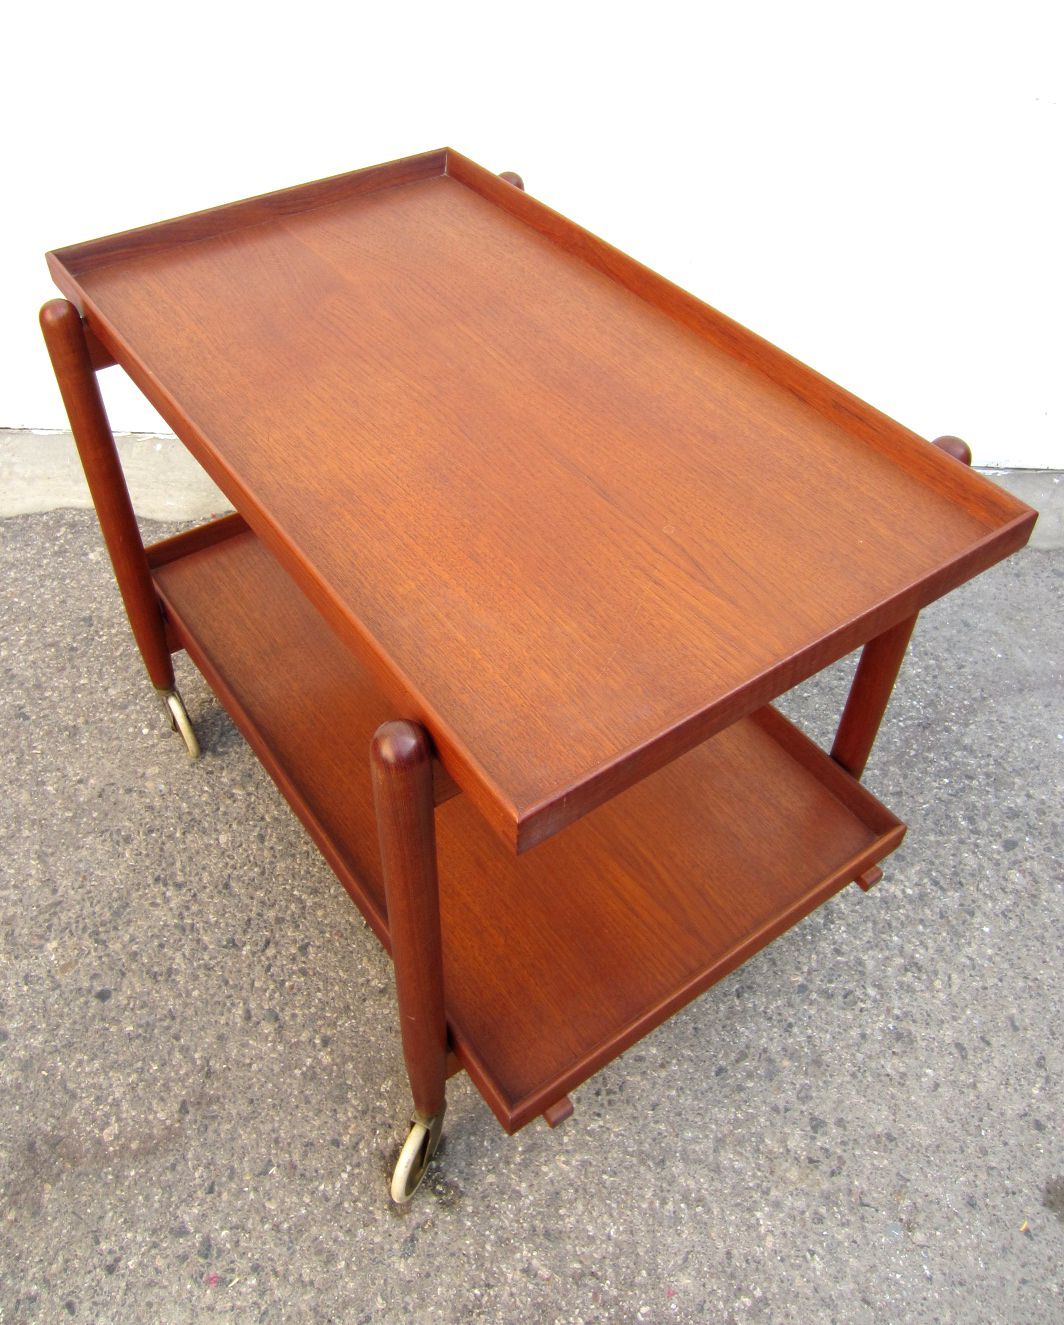 Vintage Mid Century Modern tea/bar cart designed by Poul Hundevad. 
Killer design allowing top tray to slide over so that the bottom tray can be placed next to it making a large 60